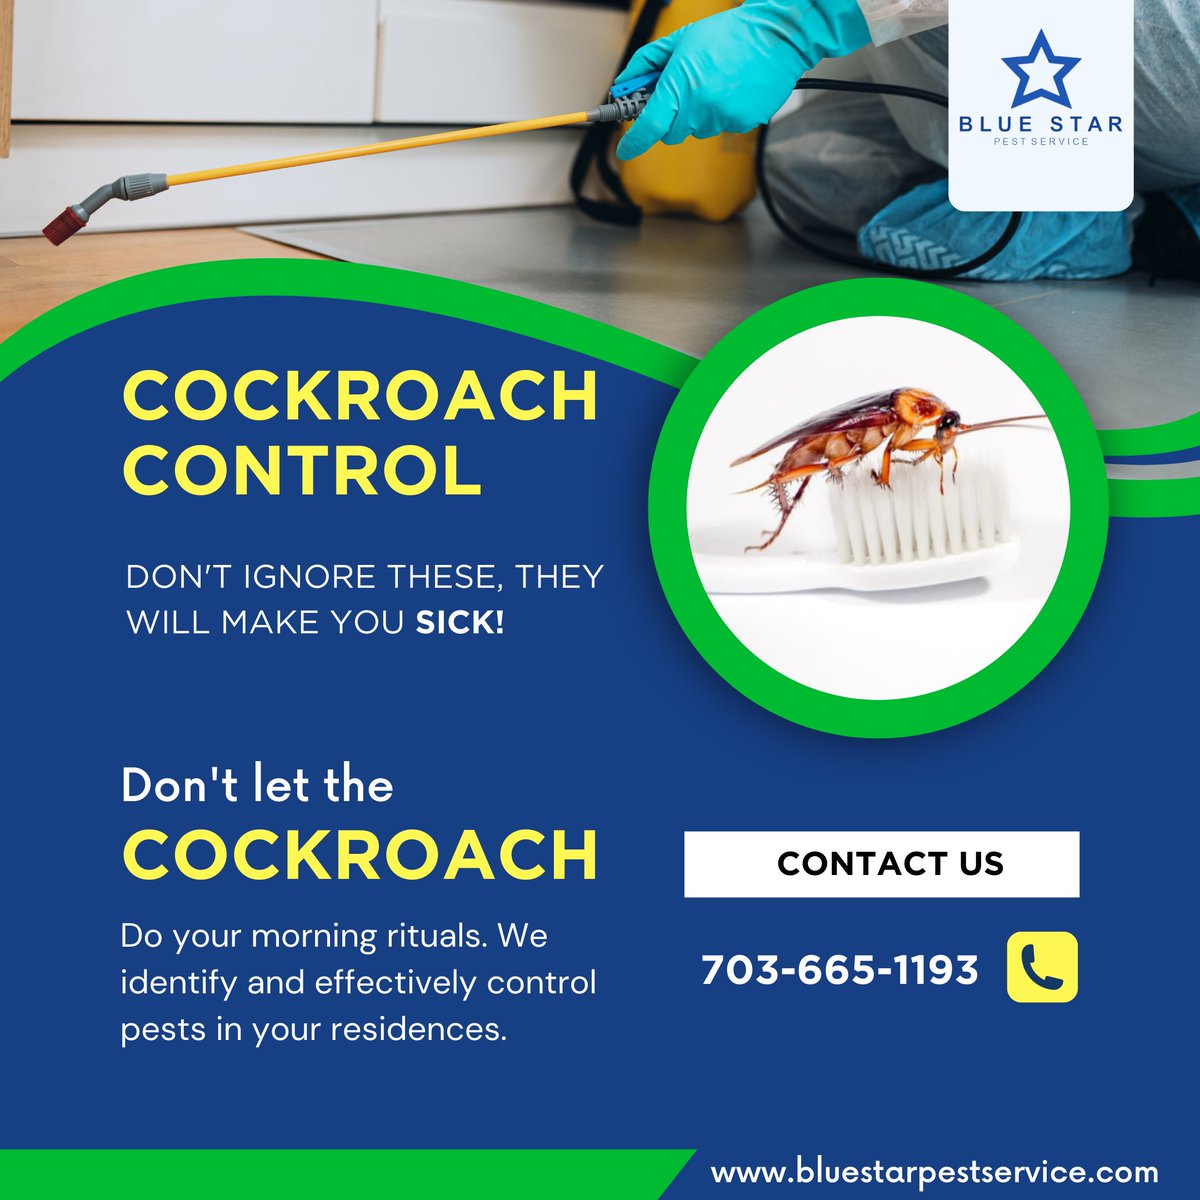 'Eliminate Cockroach Menace: Prioritize Your Well-being and Maintain a Healthy Home Environment with Our Effective Control Services'

#pestcontrol #petservices #bluestarpest #manassas #termitecontrol #rodentcontrol #manassascity #help